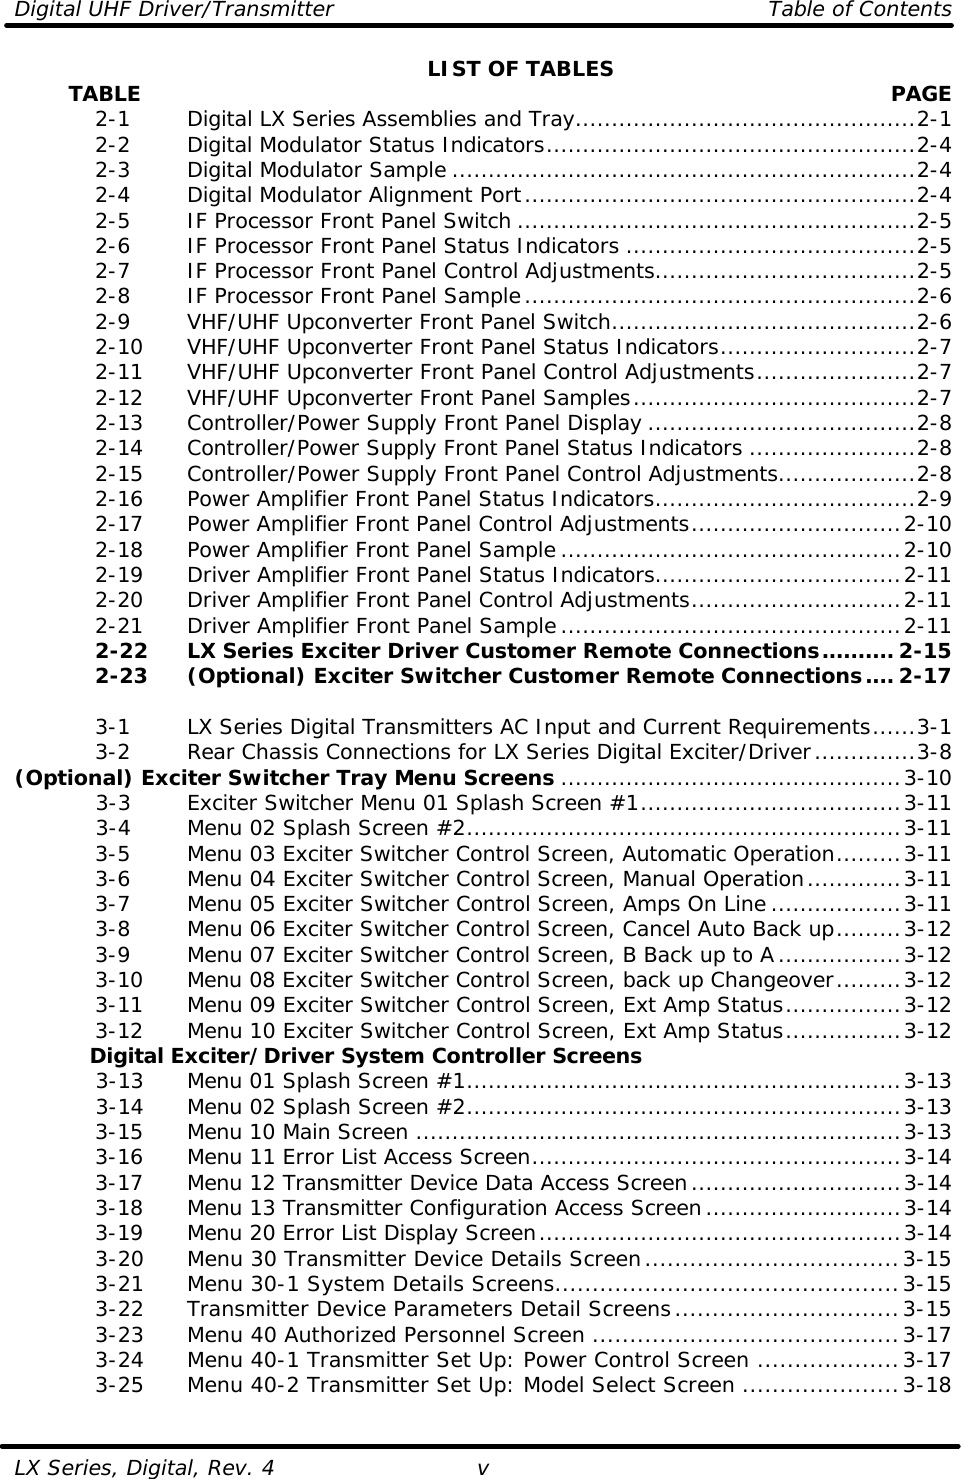 Digital UHF Driver/Transmitter    Table of Contents  LX Series, Digital, Rev. 4 v LIST OF TABLES         TABLE  PAGE  2-1   Digital LX Series Assemblies and Tray...............................................2-1  2-2   Digital Modulator Status Indicators...................................................2-4  2-3   Digital Modulator Sample ................................................................2-4  2-4   Digital Modulator Alignment Port......................................................2-4  2-5   IF Processor Front Panel Switch .......................................................2-5  2-6   IF Processor Front Panel Status Indicators ........................................2-5  2-7   IF Processor Front Panel Control Adjustments....................................2-5  2-8   IF Processor Front Panel Sample......................................................2-6  2-9   VHF/UHF Upconverter Front Panel Switch..........................................2-6  2-10 VHF/UHF Upconverter Front Panel Status Indicators...........................2-7  2-11 VHF/UHF Upconverter Front Panel Control Adjustments......................2-7  2-12 VHF/UHF Upconverter Front Panel Samples.......................................2-7  2-13 Controller/Power Supply Front Panel Display .....................................2-8  2-14 Controller/Power Supply Front Panel Status Indicators .......................2-8  2-15 Controller/Power Supply Front Panel Control Adjustments...................2-8  2-16 Power Amplifier Front Panel Status Indicators....................................2-9  2-17 Power Amplifier Front Panel Control Adjustments.............................2-10  2-18 Power Amplifier Front Panel Sample...............................................2-10  2-19 Driver Amplifier Front Panel Status Indicators..................................2-11  2-20 Driver Amplifier Front Panel Control Adjustments.............................2-11  2-21 Driver Amplifier Front Panel Sample...............................................2-11  2-22 LX Series Exciter Driver Customer Remote Connections.......... 2-15  2-23 (Optional) Exciter Switcher Customer Remote Connections.... 2-17   3-1   LX Series Digital Transmitters AC Input and Current Requirements......3-1  3-2   Rear Chassis Connections for LX Series Digital Exciter/Driver..............3-8 (Optional) Exciter Switcher Tray Menu Screens ...............................................3-10  3-3   Exciter Switcher Menu 01 Splash Screen #1....................................3-11  3-4   Menu 02 Splash Screen #2............................................................3-11  3-5   Menu 03 Exciter Switcher Control Screen, Automatic Operation.........3-11  3-6   Menu 04 Exciter Switcher Control Screen, Manual Operation.............3-11  3-7   Menu 05 Exciter Switcher Control Screen, Amps On Line ..................3-11  3-8   Menu 06 Exciter Switcher Control Screen, Cancel Auto Back up.........3-12  3-9   Menu 07 Exciter Switcher Control Screen, B Back up to A.................3-12  3-10 Menu 08 Exciter Switcher Control Screen, back up Changeover.........3-12  3-11 Menu 09 Exciter Switcher Control Screen, Ext Amp Status................3-12  3-12 Menu 10 Exciter Switcher Control Screen, Ext Amp Status................3-12 Digital Exciter/Driver System Controller Screens  3-13 Menu 01 Splash Screen #1............................................................3-13  3-14 Menu 02 Splash Screen #2............................................................3-13  3-15 Menu 10 Main Screen ...................................................................3-13  3-16 Menu 11 Error List Access Screen...................................................3-14  3-17 Menu 12 Transmitter Device Data Access Screen.............................3-14  3-18 Menu 13 Transmitter Configuration Access Screen...........................3-14  3-19 Menu 20 Error List Display Screen..................................................3-14  3-20 Menu 30 Transmitter Device Details Screen..................................3-15  3-21 Menu 30-1 System Details Screens..............................................3-15  3-22 Transmitter Device Parameters Detail Screens..............................3-15  3-23 Menu 40 Authorized Personnel Screen .........................................3-17  3-24 Menu 40-1 Transmitter Set Up: Power Control Screen ...................3-17  3-25 Menu 40-2 Transmitter Set Up: Model Select Screen .....................3-18  